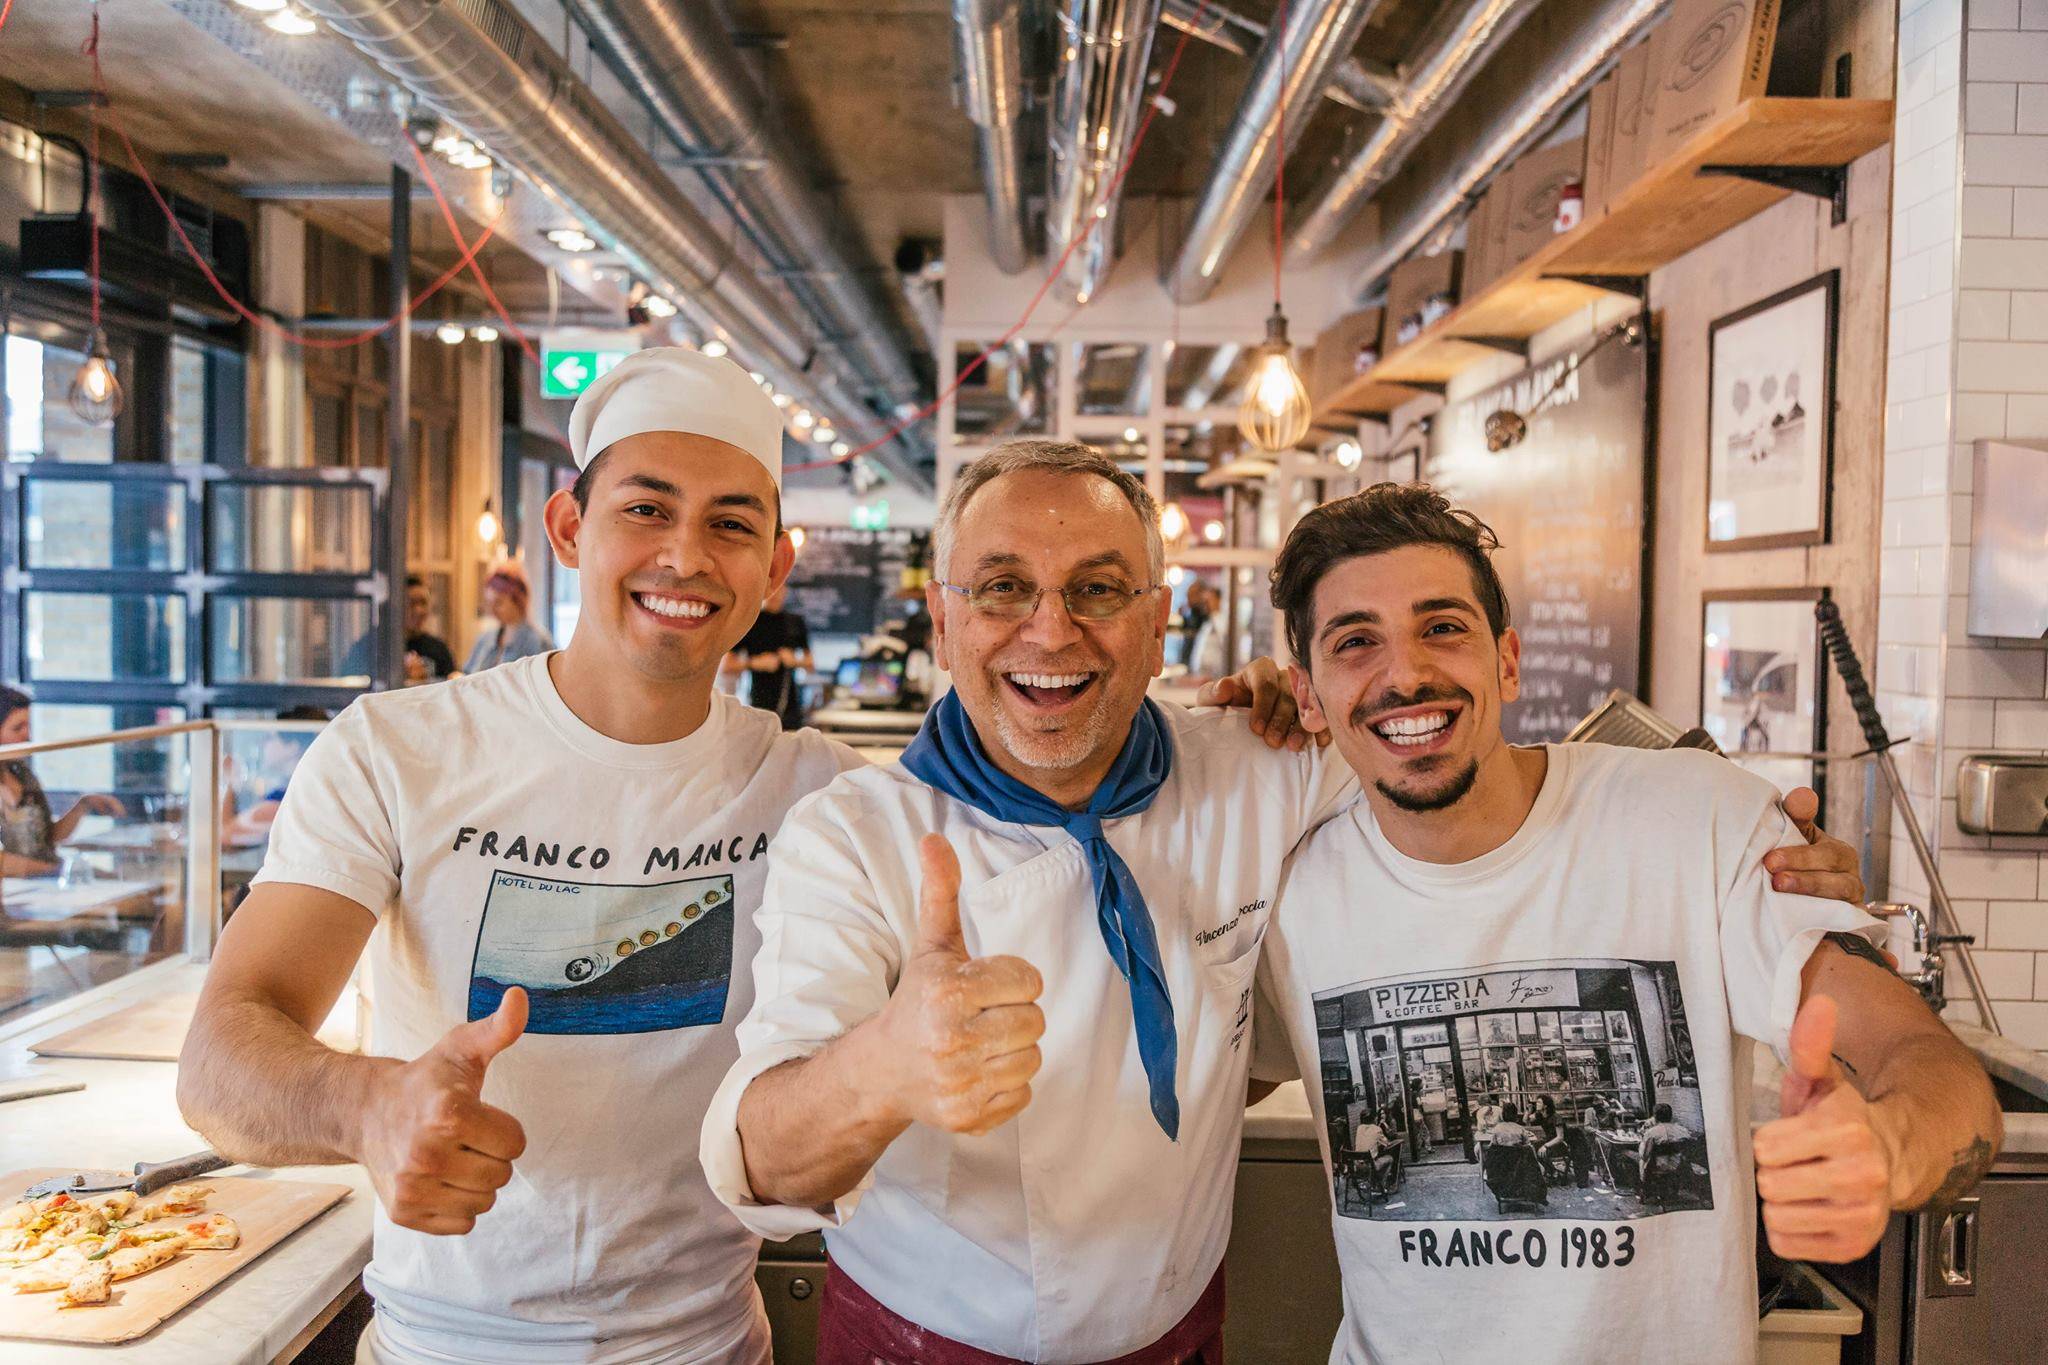 Franco Manca: a pizza paean to authentic chain dining